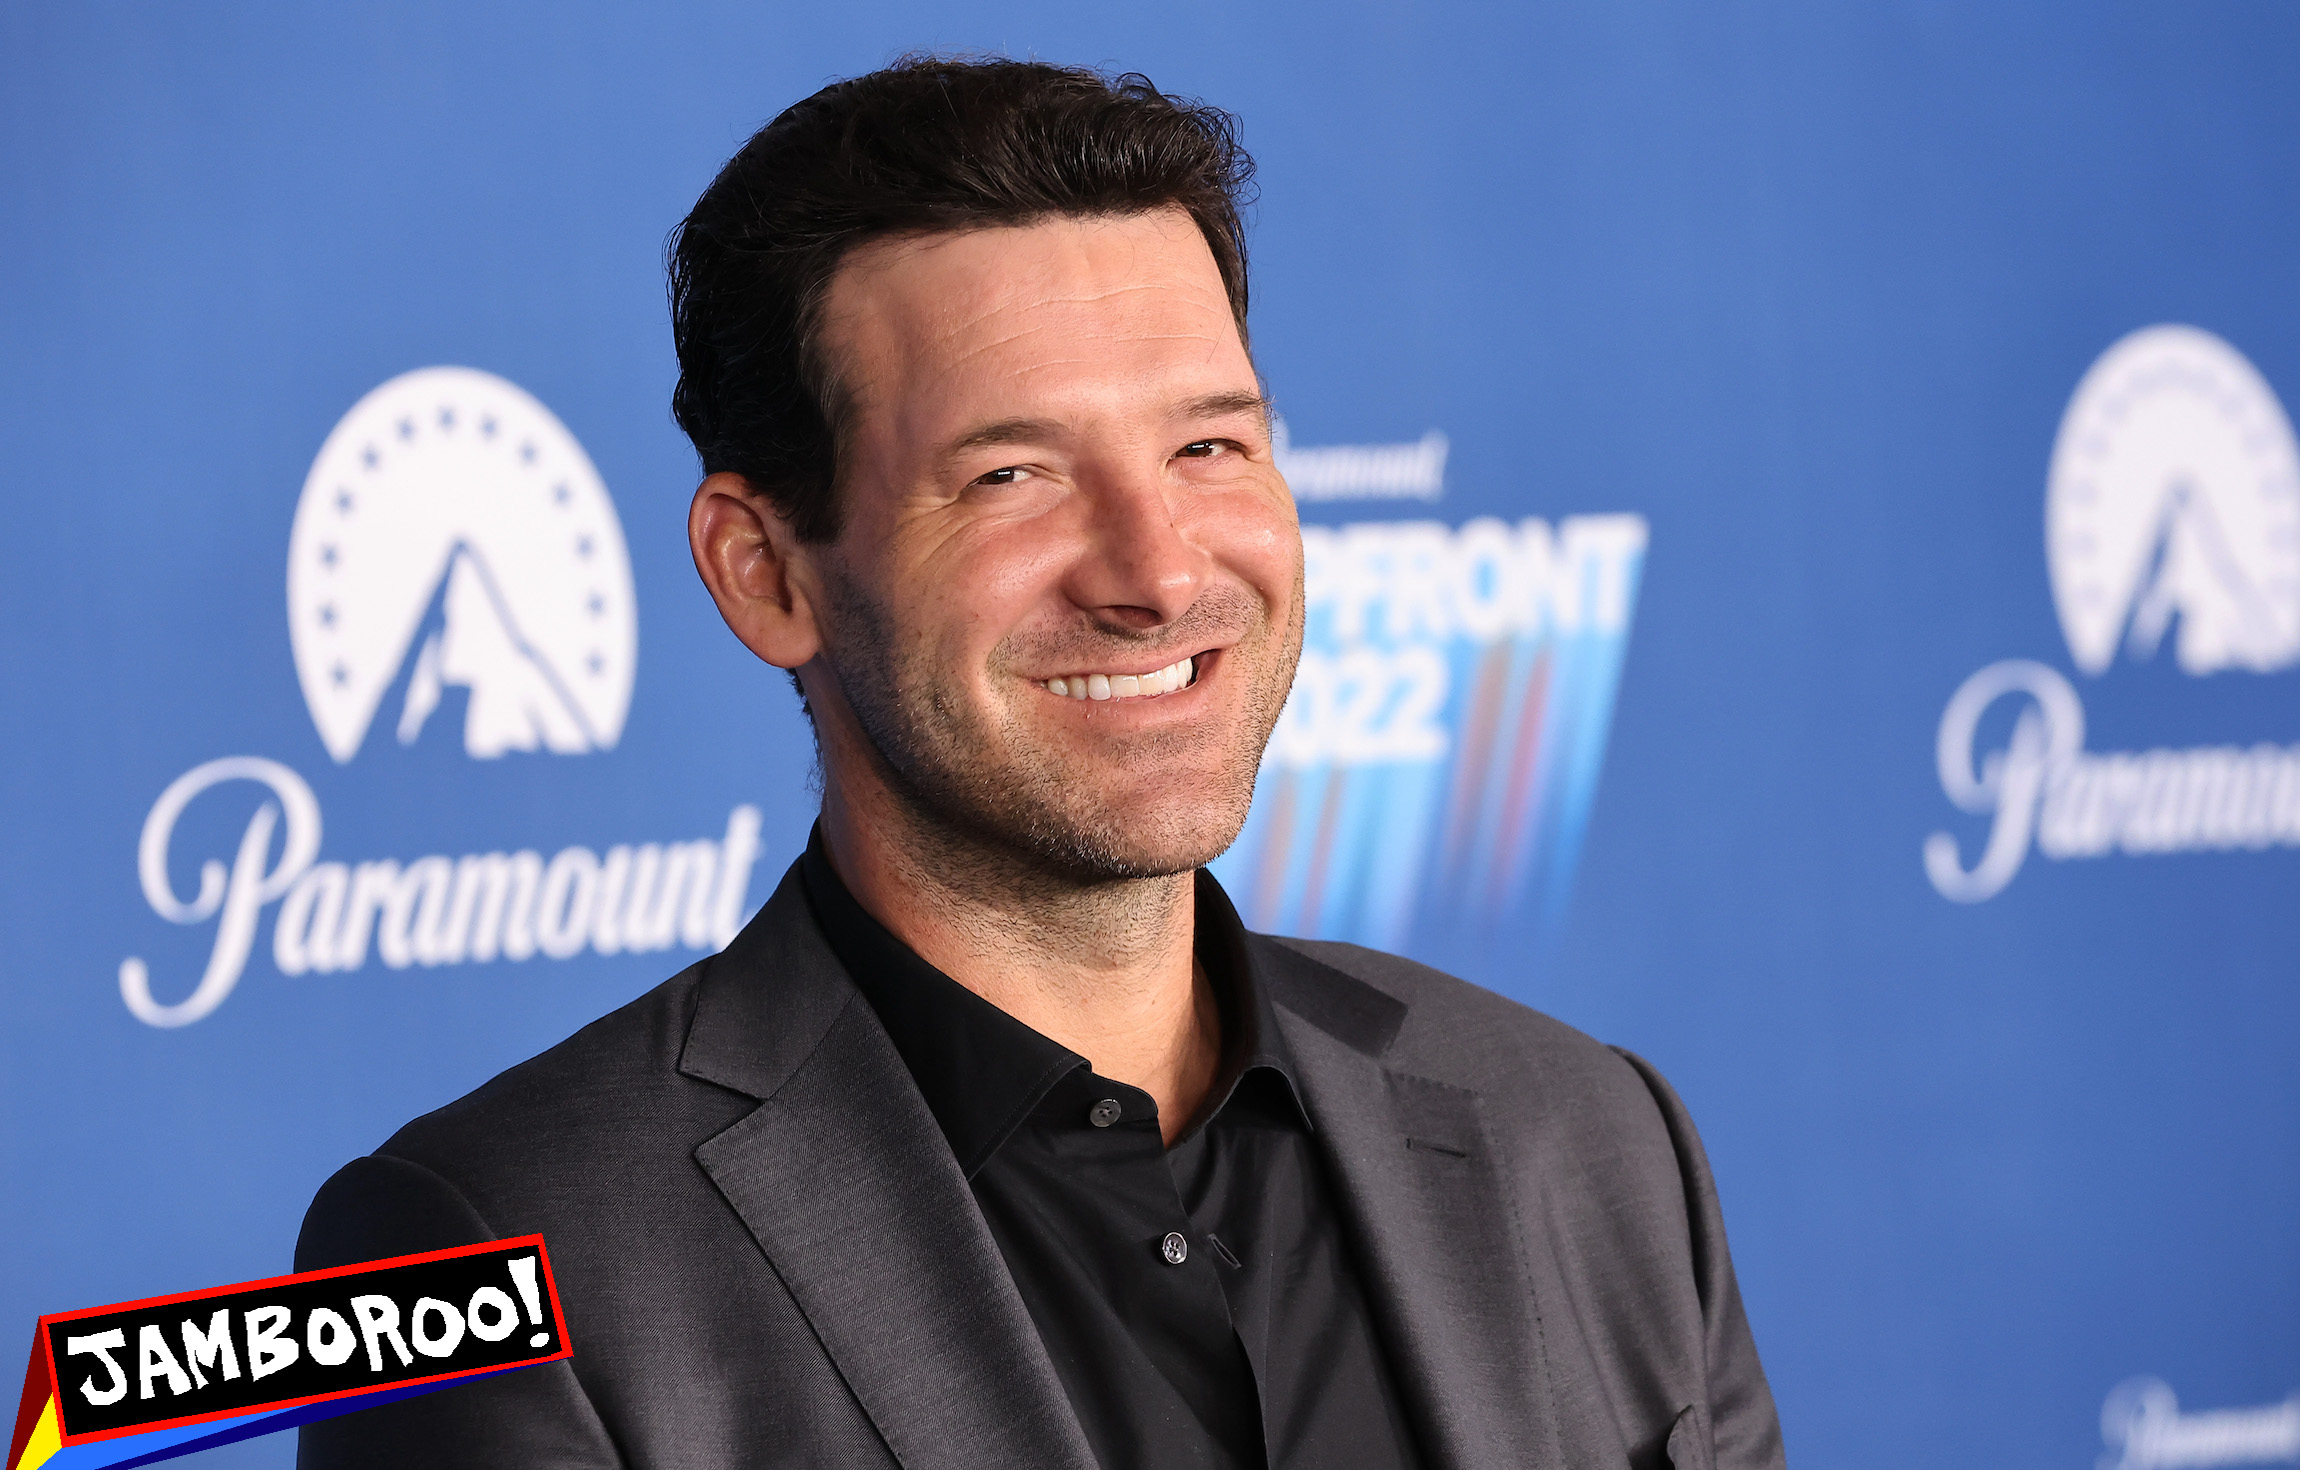 NEW YORK, NEW YORK - MAY 18: Tony Romo attends the 2022 Paramount Upfront at 666 Madison Avenue on May 18, 2022 in New York City. (Photo by Arturo Holmes/WireImage)